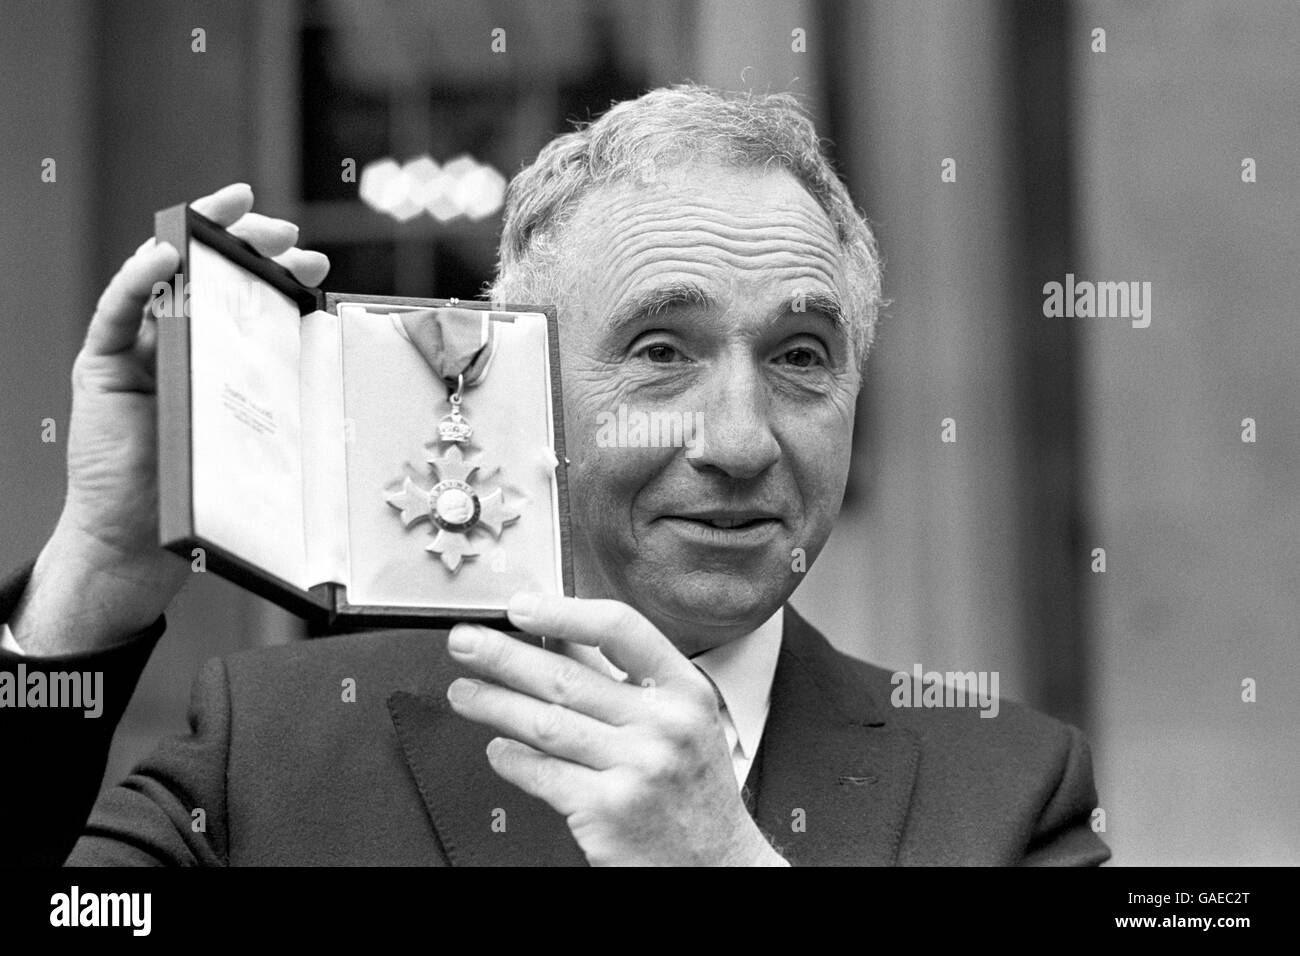 Actor Nigel Hawthorne, star of BBC TV's 'Yes, Minister' and 'Yes, Prime Minister' with his medal after being made a Commander of the Most Excellent Order of the British Empire (CBE) at Buckingham Palace. Stock Photo